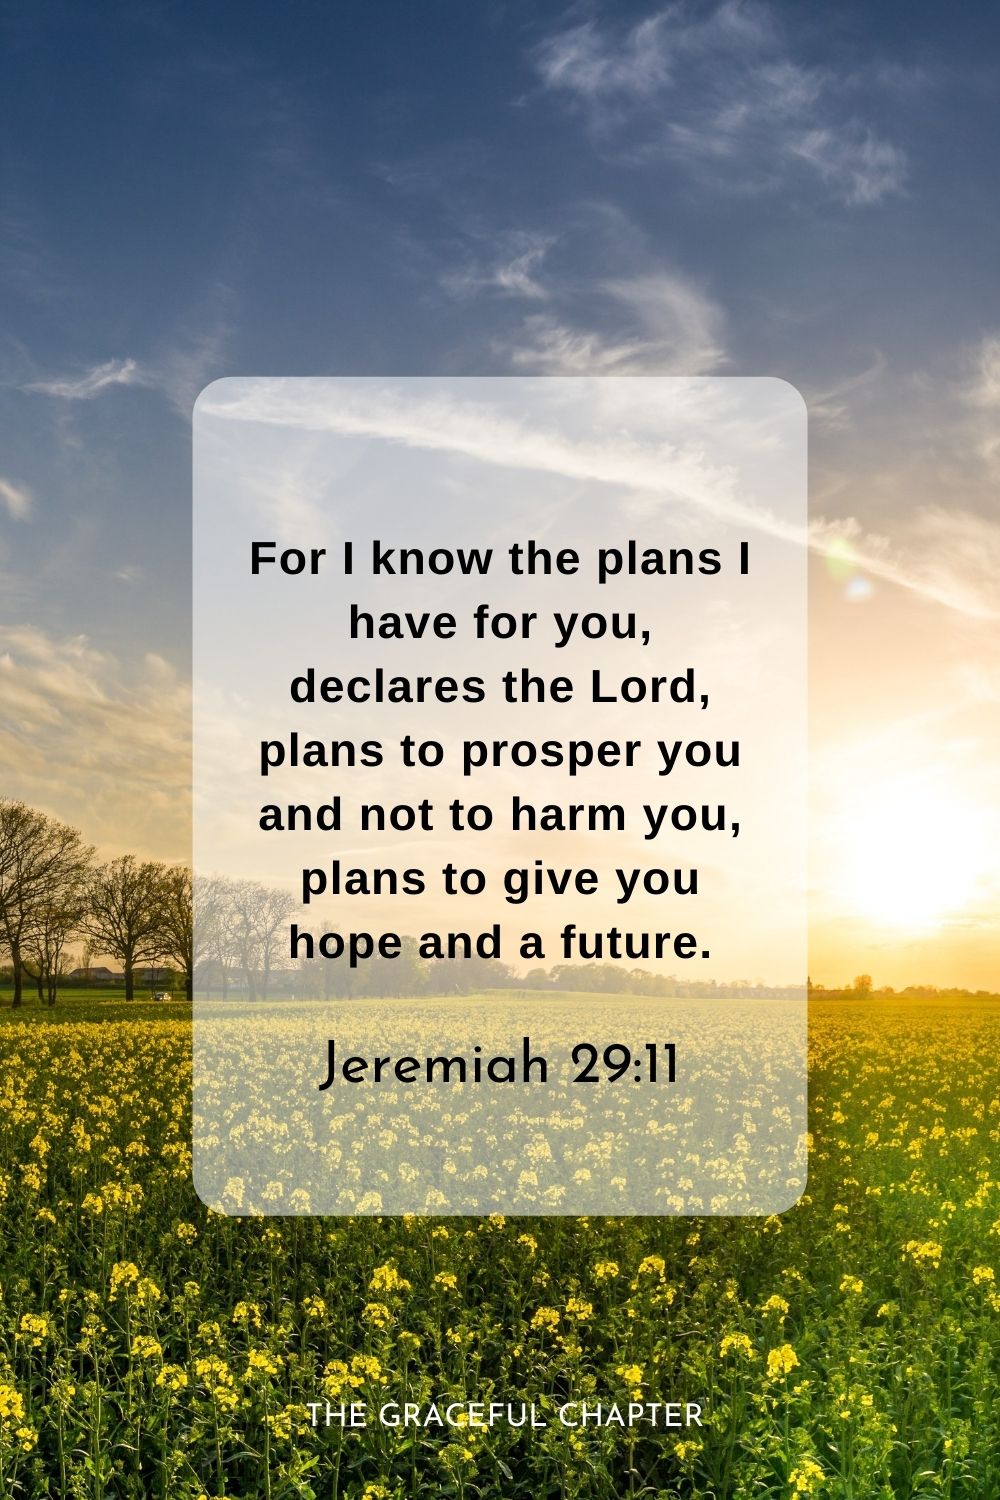 For I know the plans I have for you, declares the Lord, plans to prosper you and not to harm you, plans to give you hope and a future.